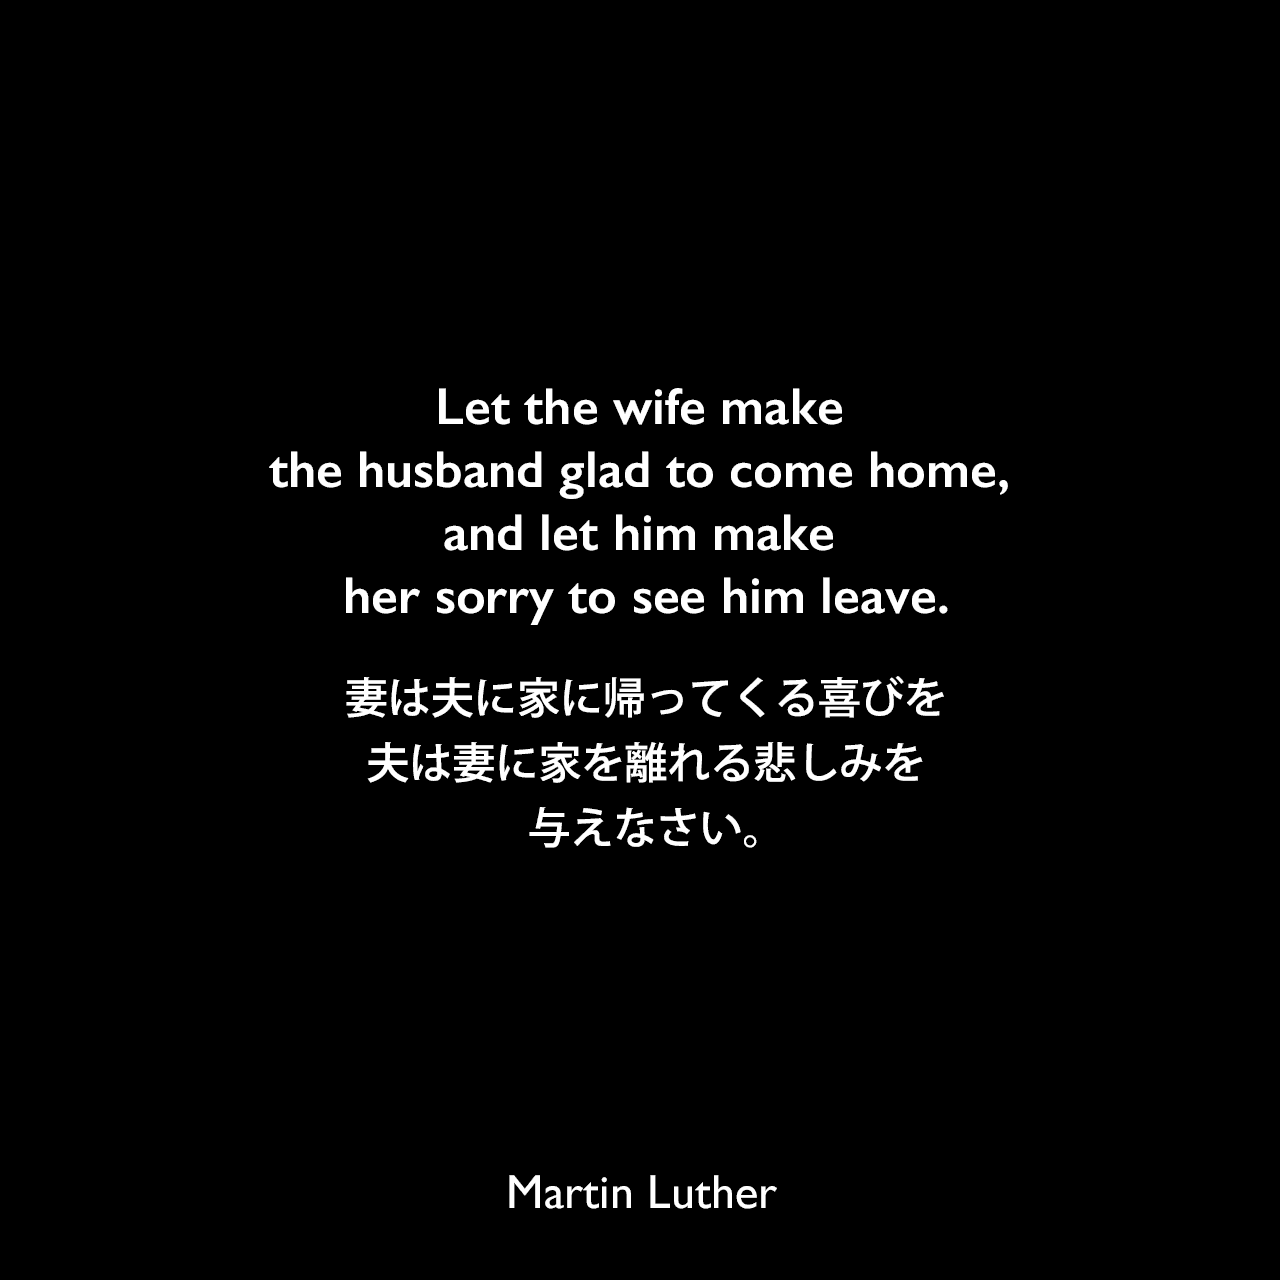 Let the wife make the husband glad to come home, and let him make her sorry to see him leave.妻は夫に家に帰ってくる喜びを、夫は妻に家を離れる悲しみを与えなさい。Martin Luther